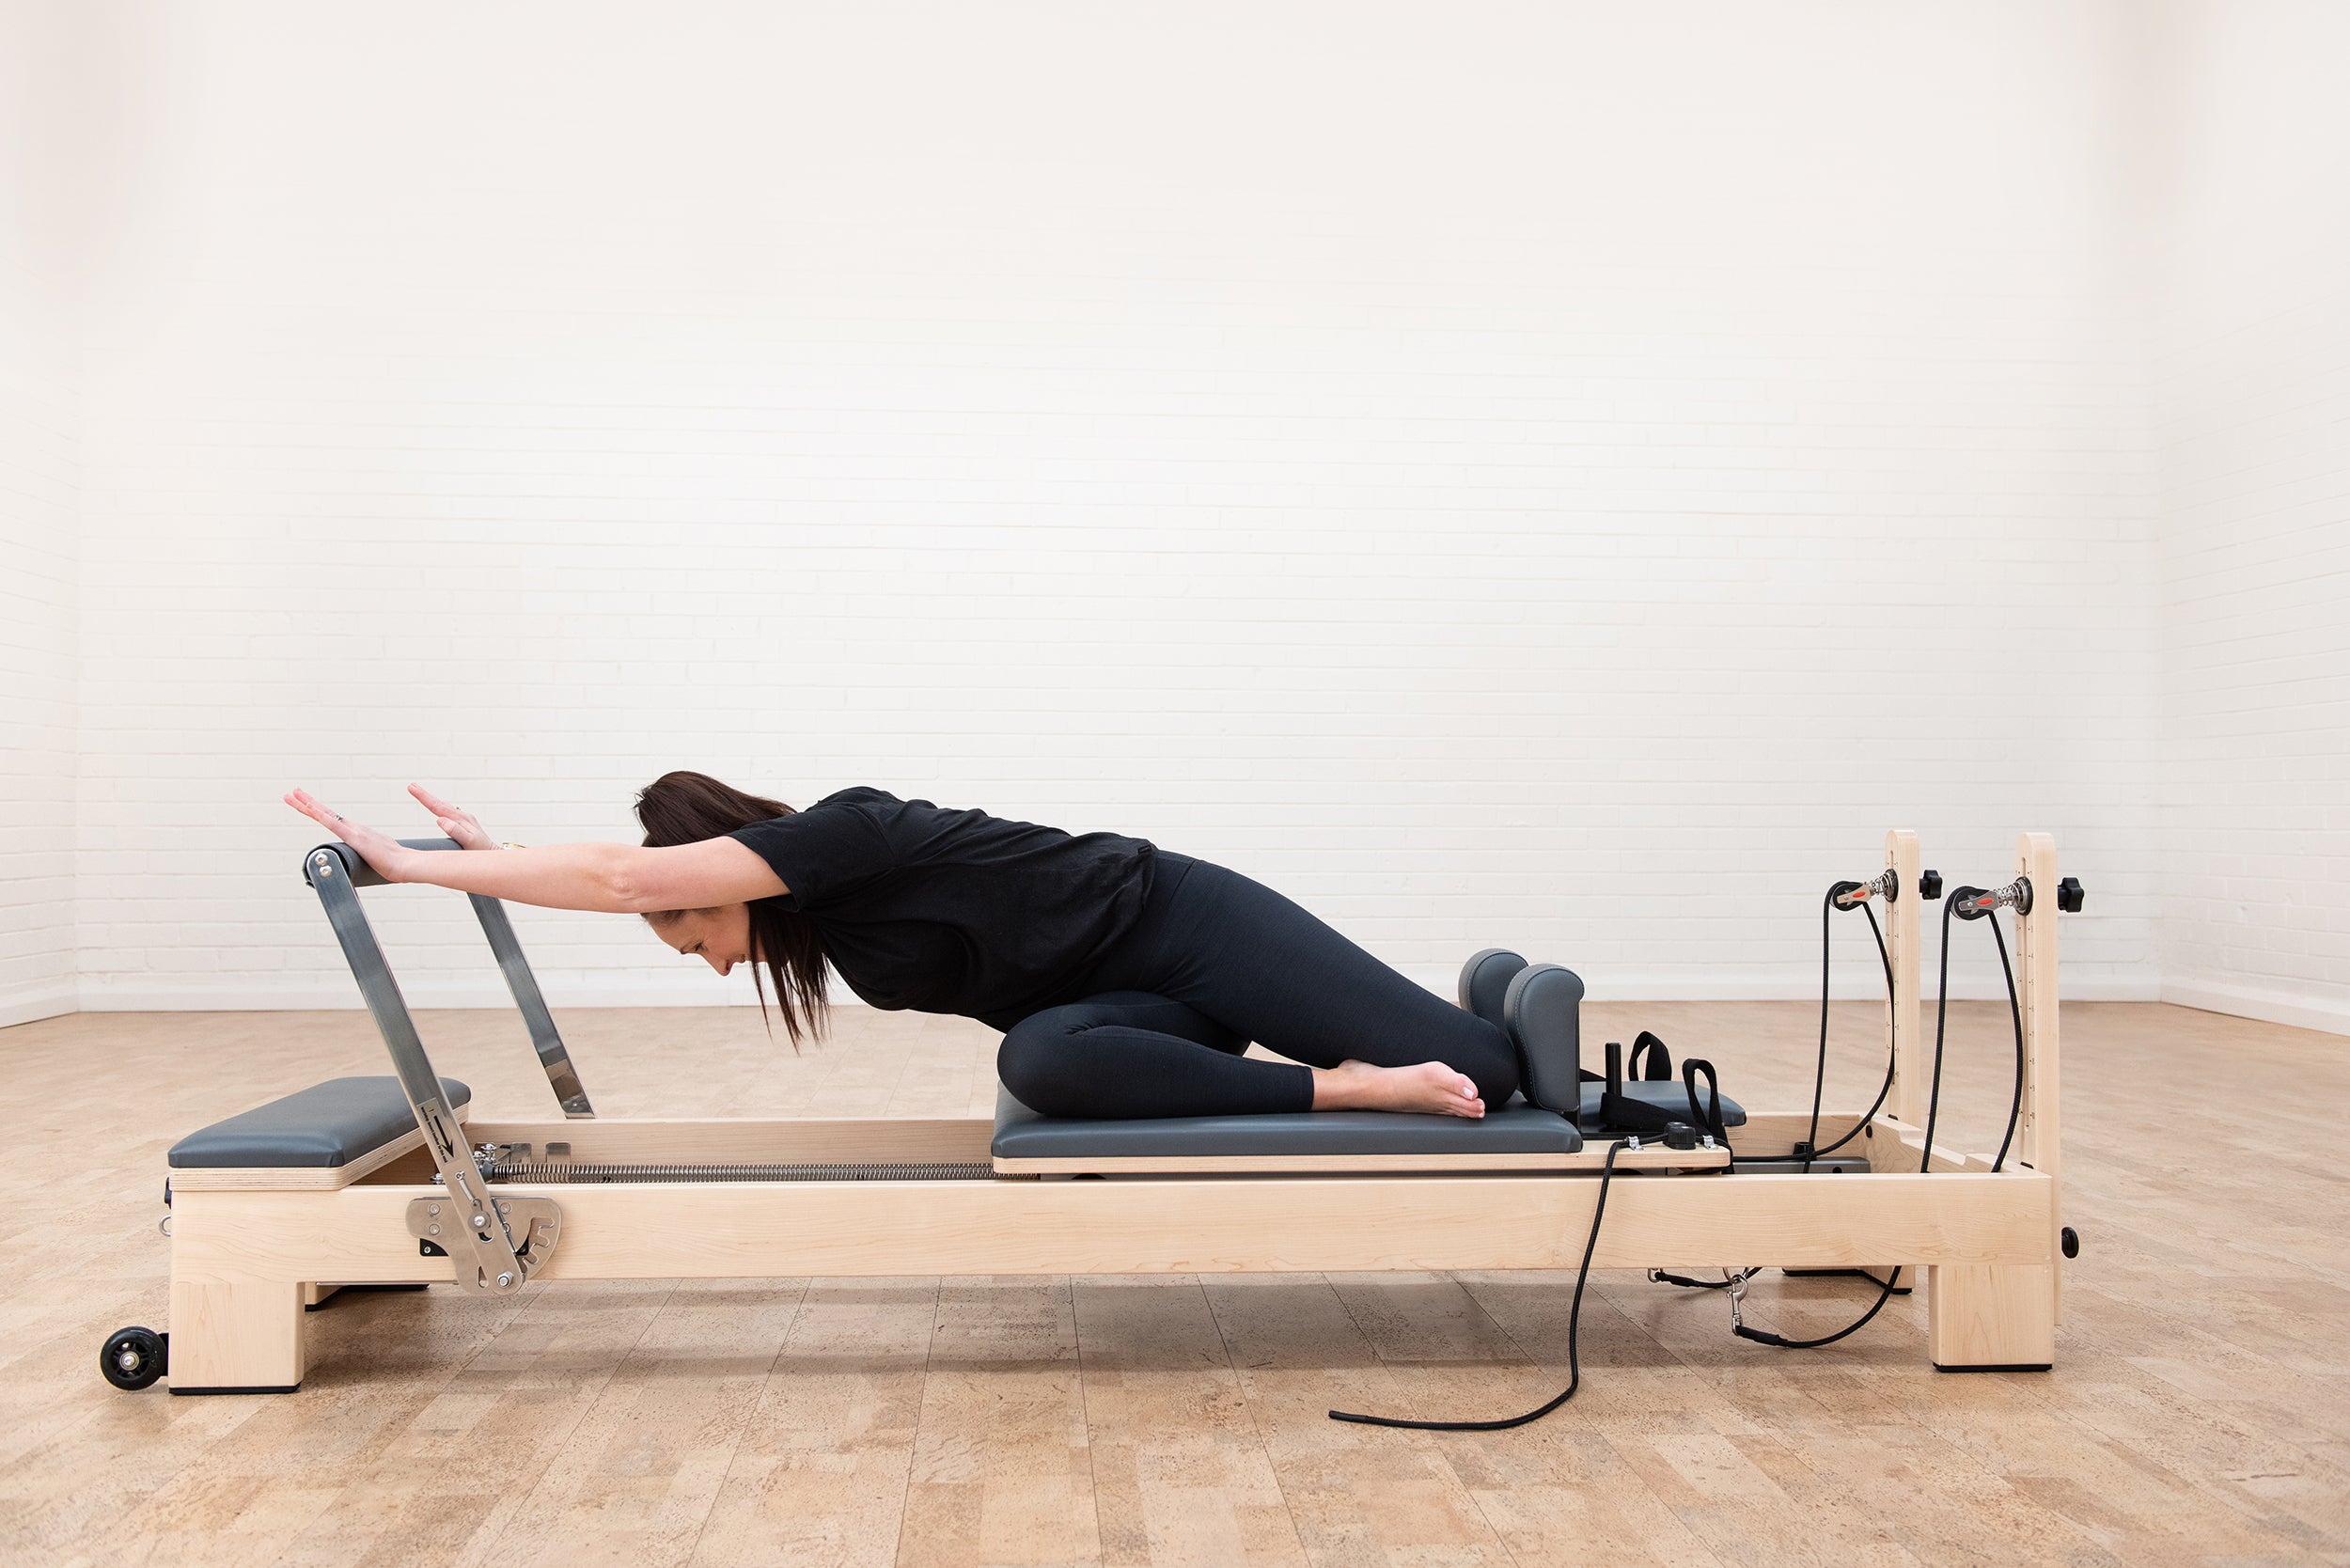 How to Do Reformer Pilates at Home Without a Reformer